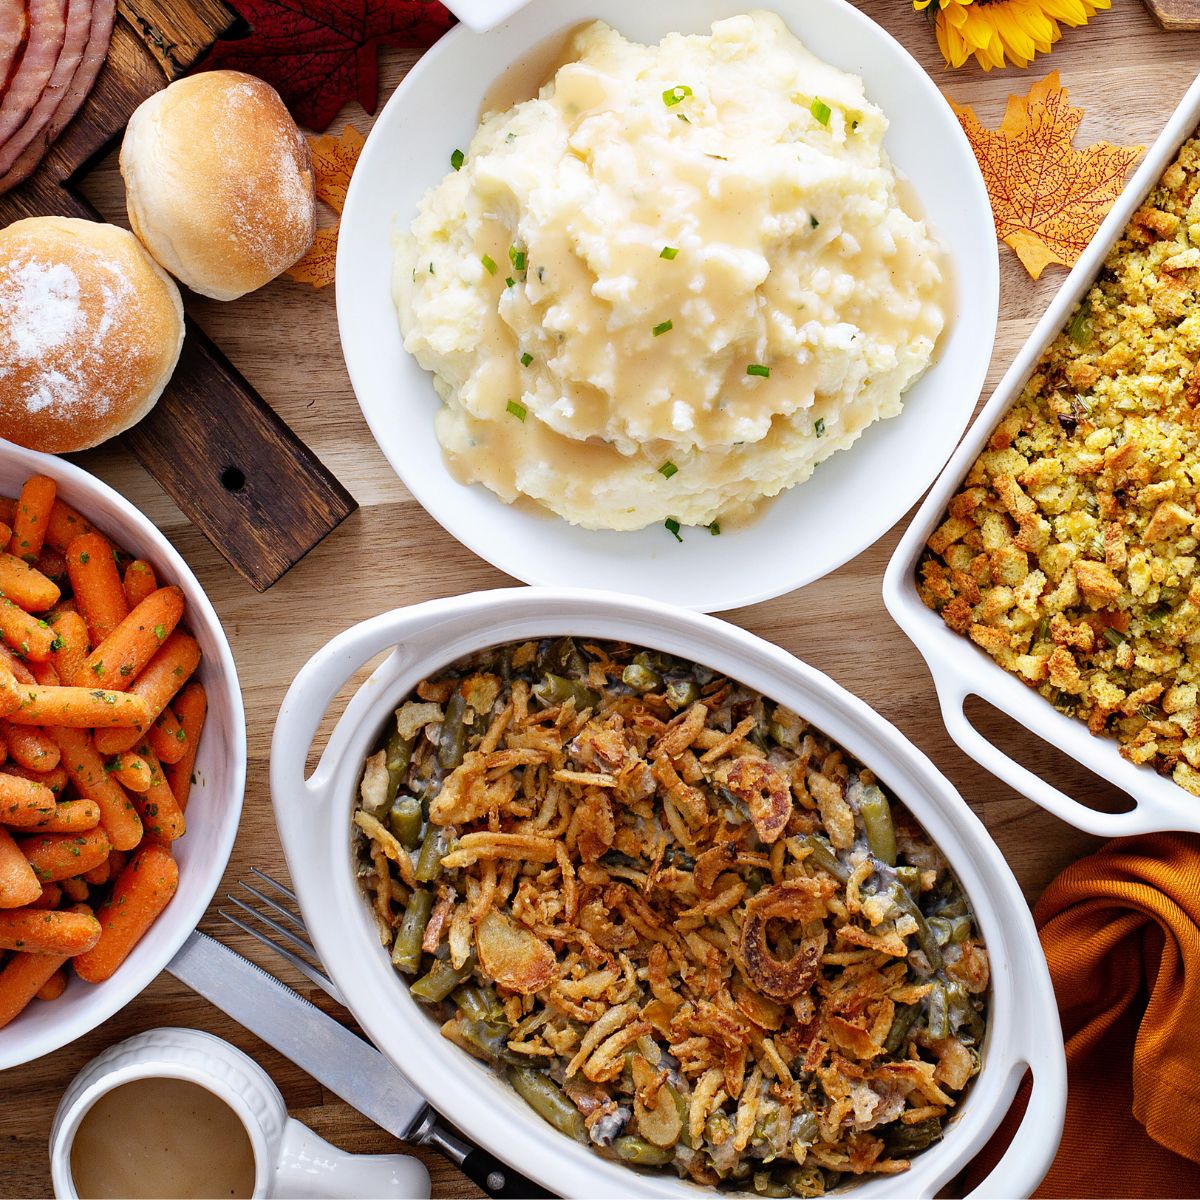 Vegan thanksgiving meal: mashed potatoes, cooked carrots, and green bean casserole